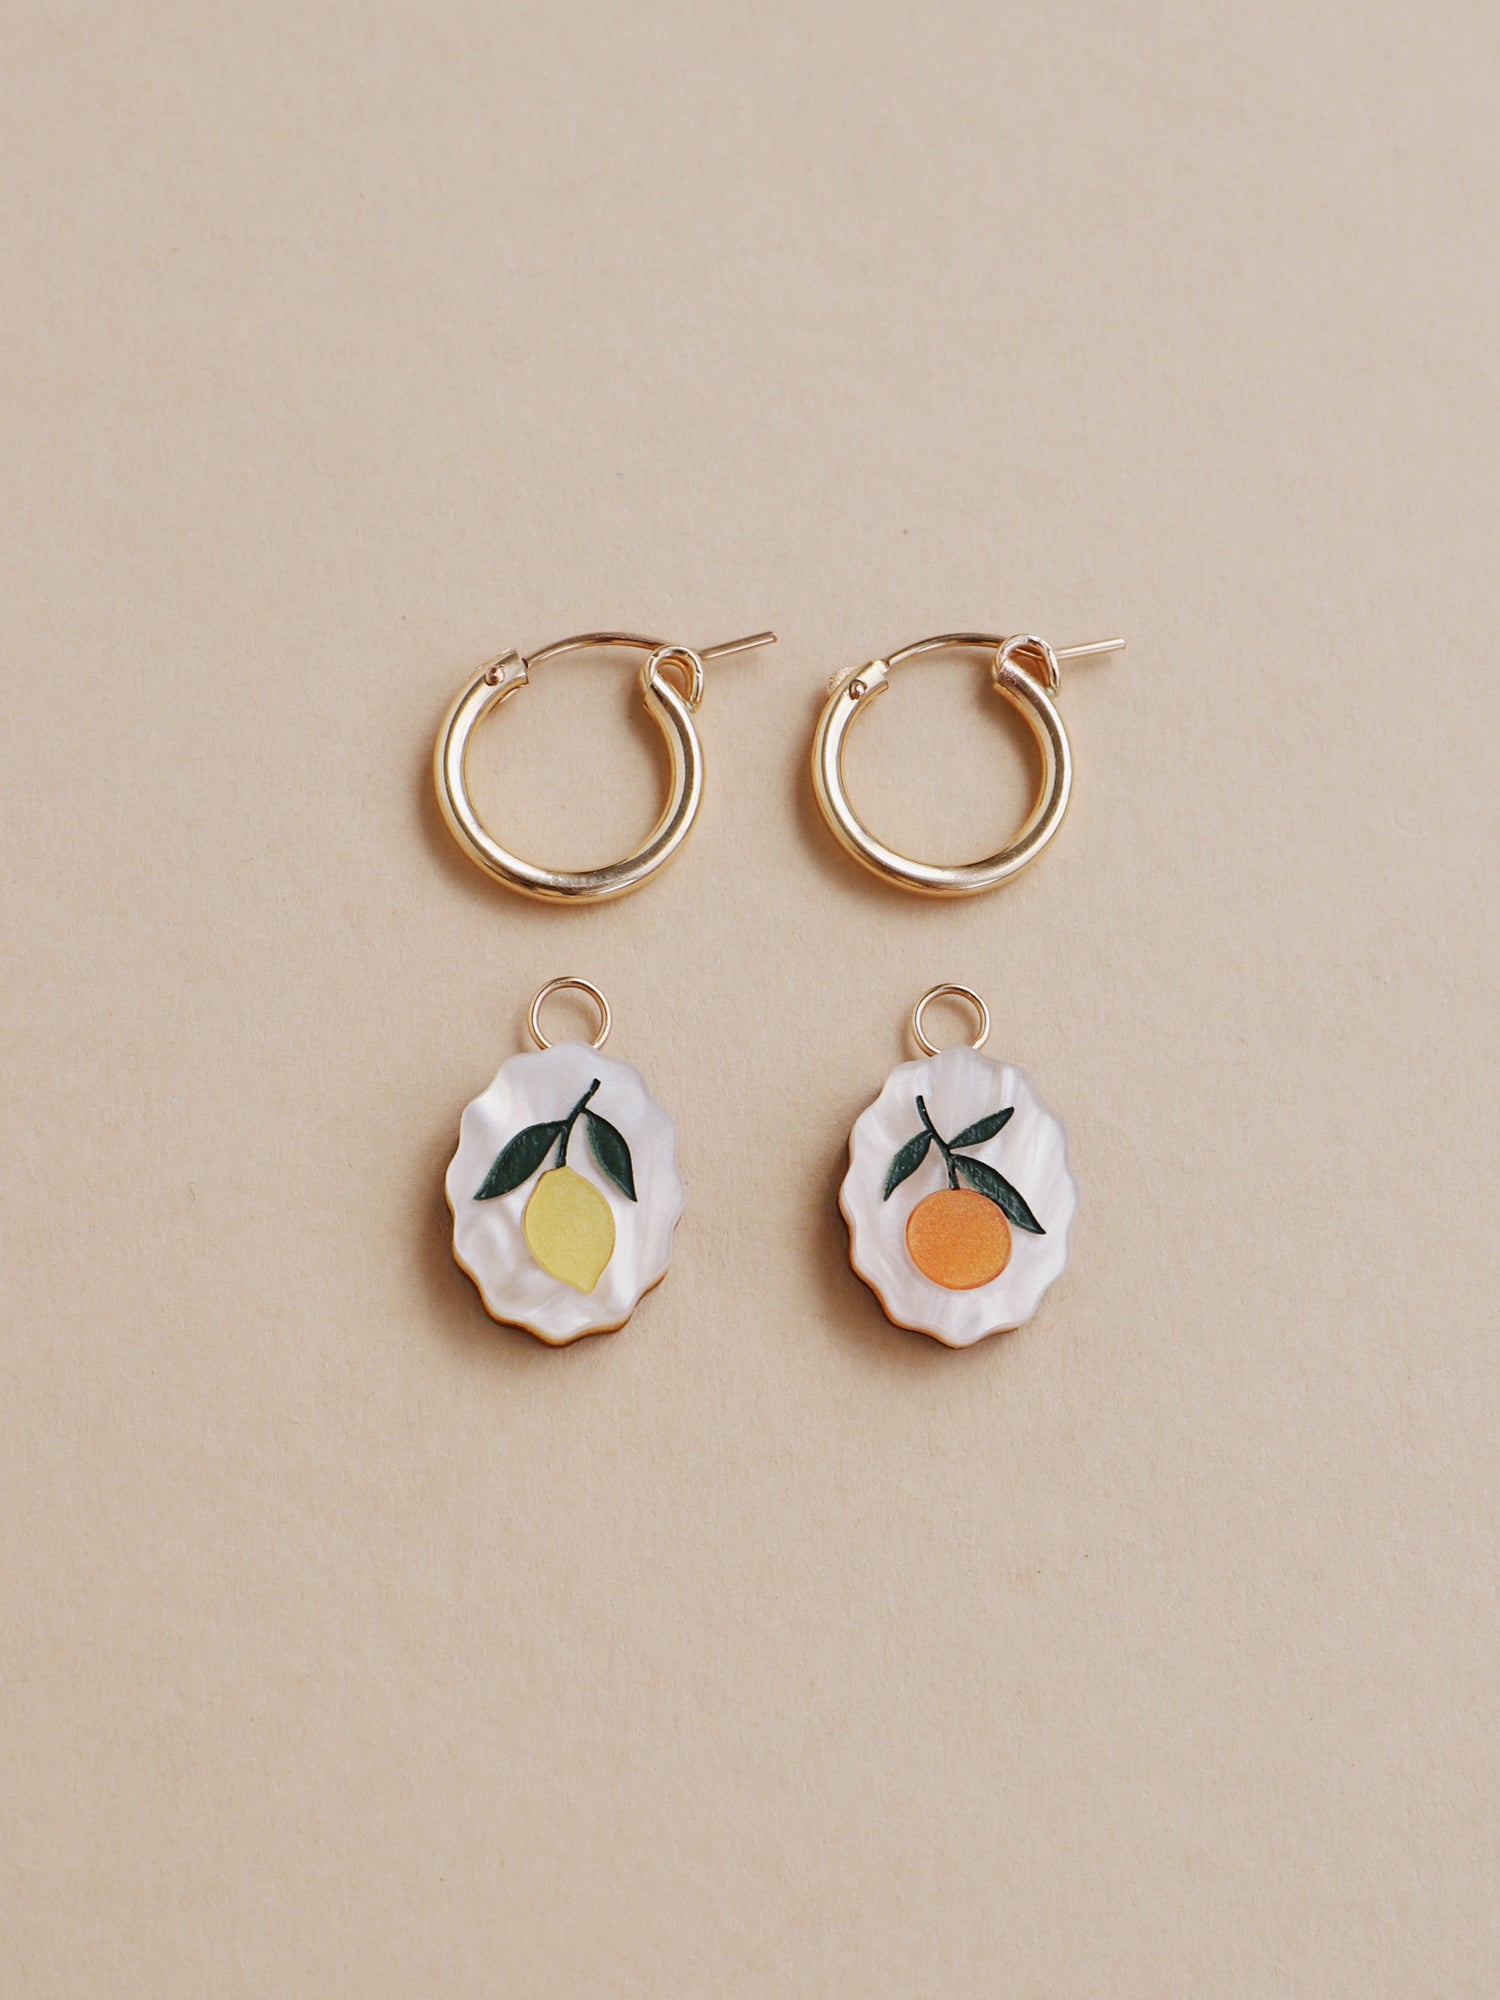 Lemon and orange charm hoop earrings. Made from acrylic and 14k gold-filled hoops & findings.  Handmade in the UK by Wolf & Moon.